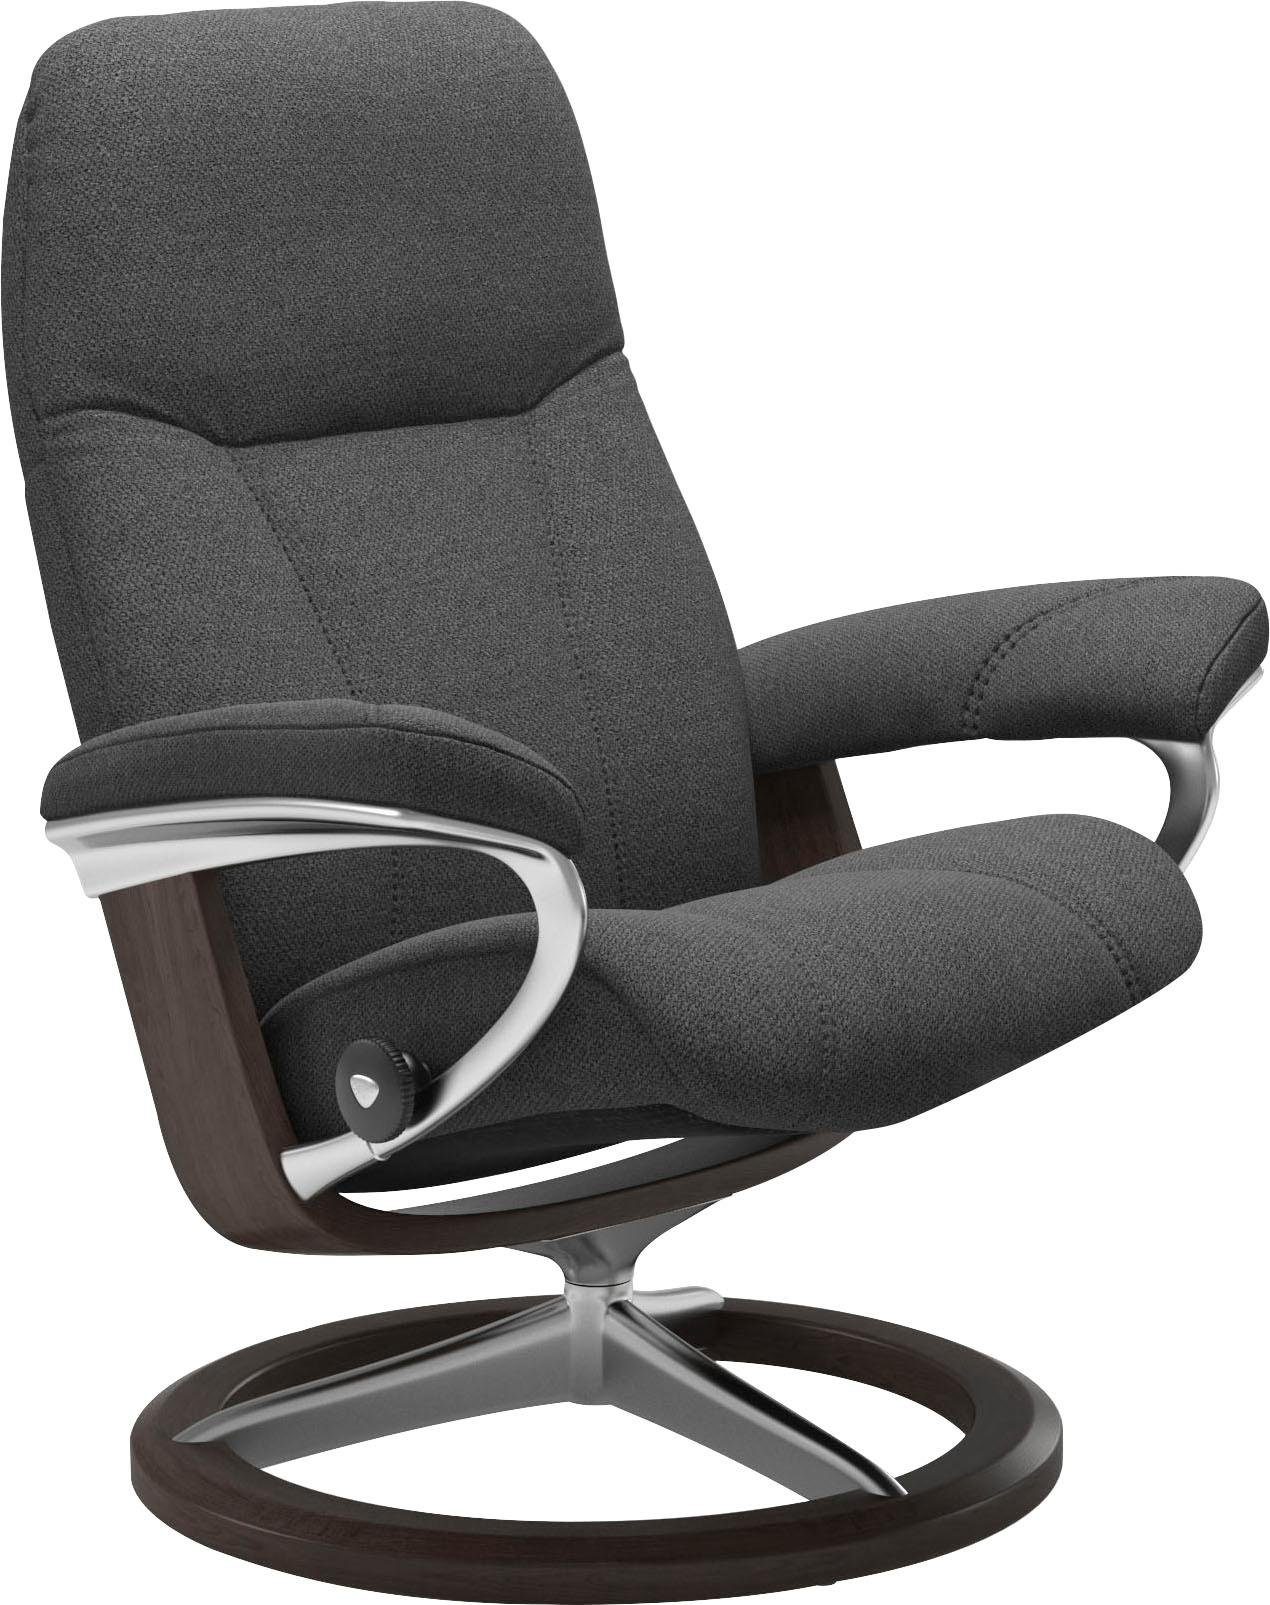 Stressless® Relaxsessel Consul, mit Signature Gestell Wenge Größe Base, L